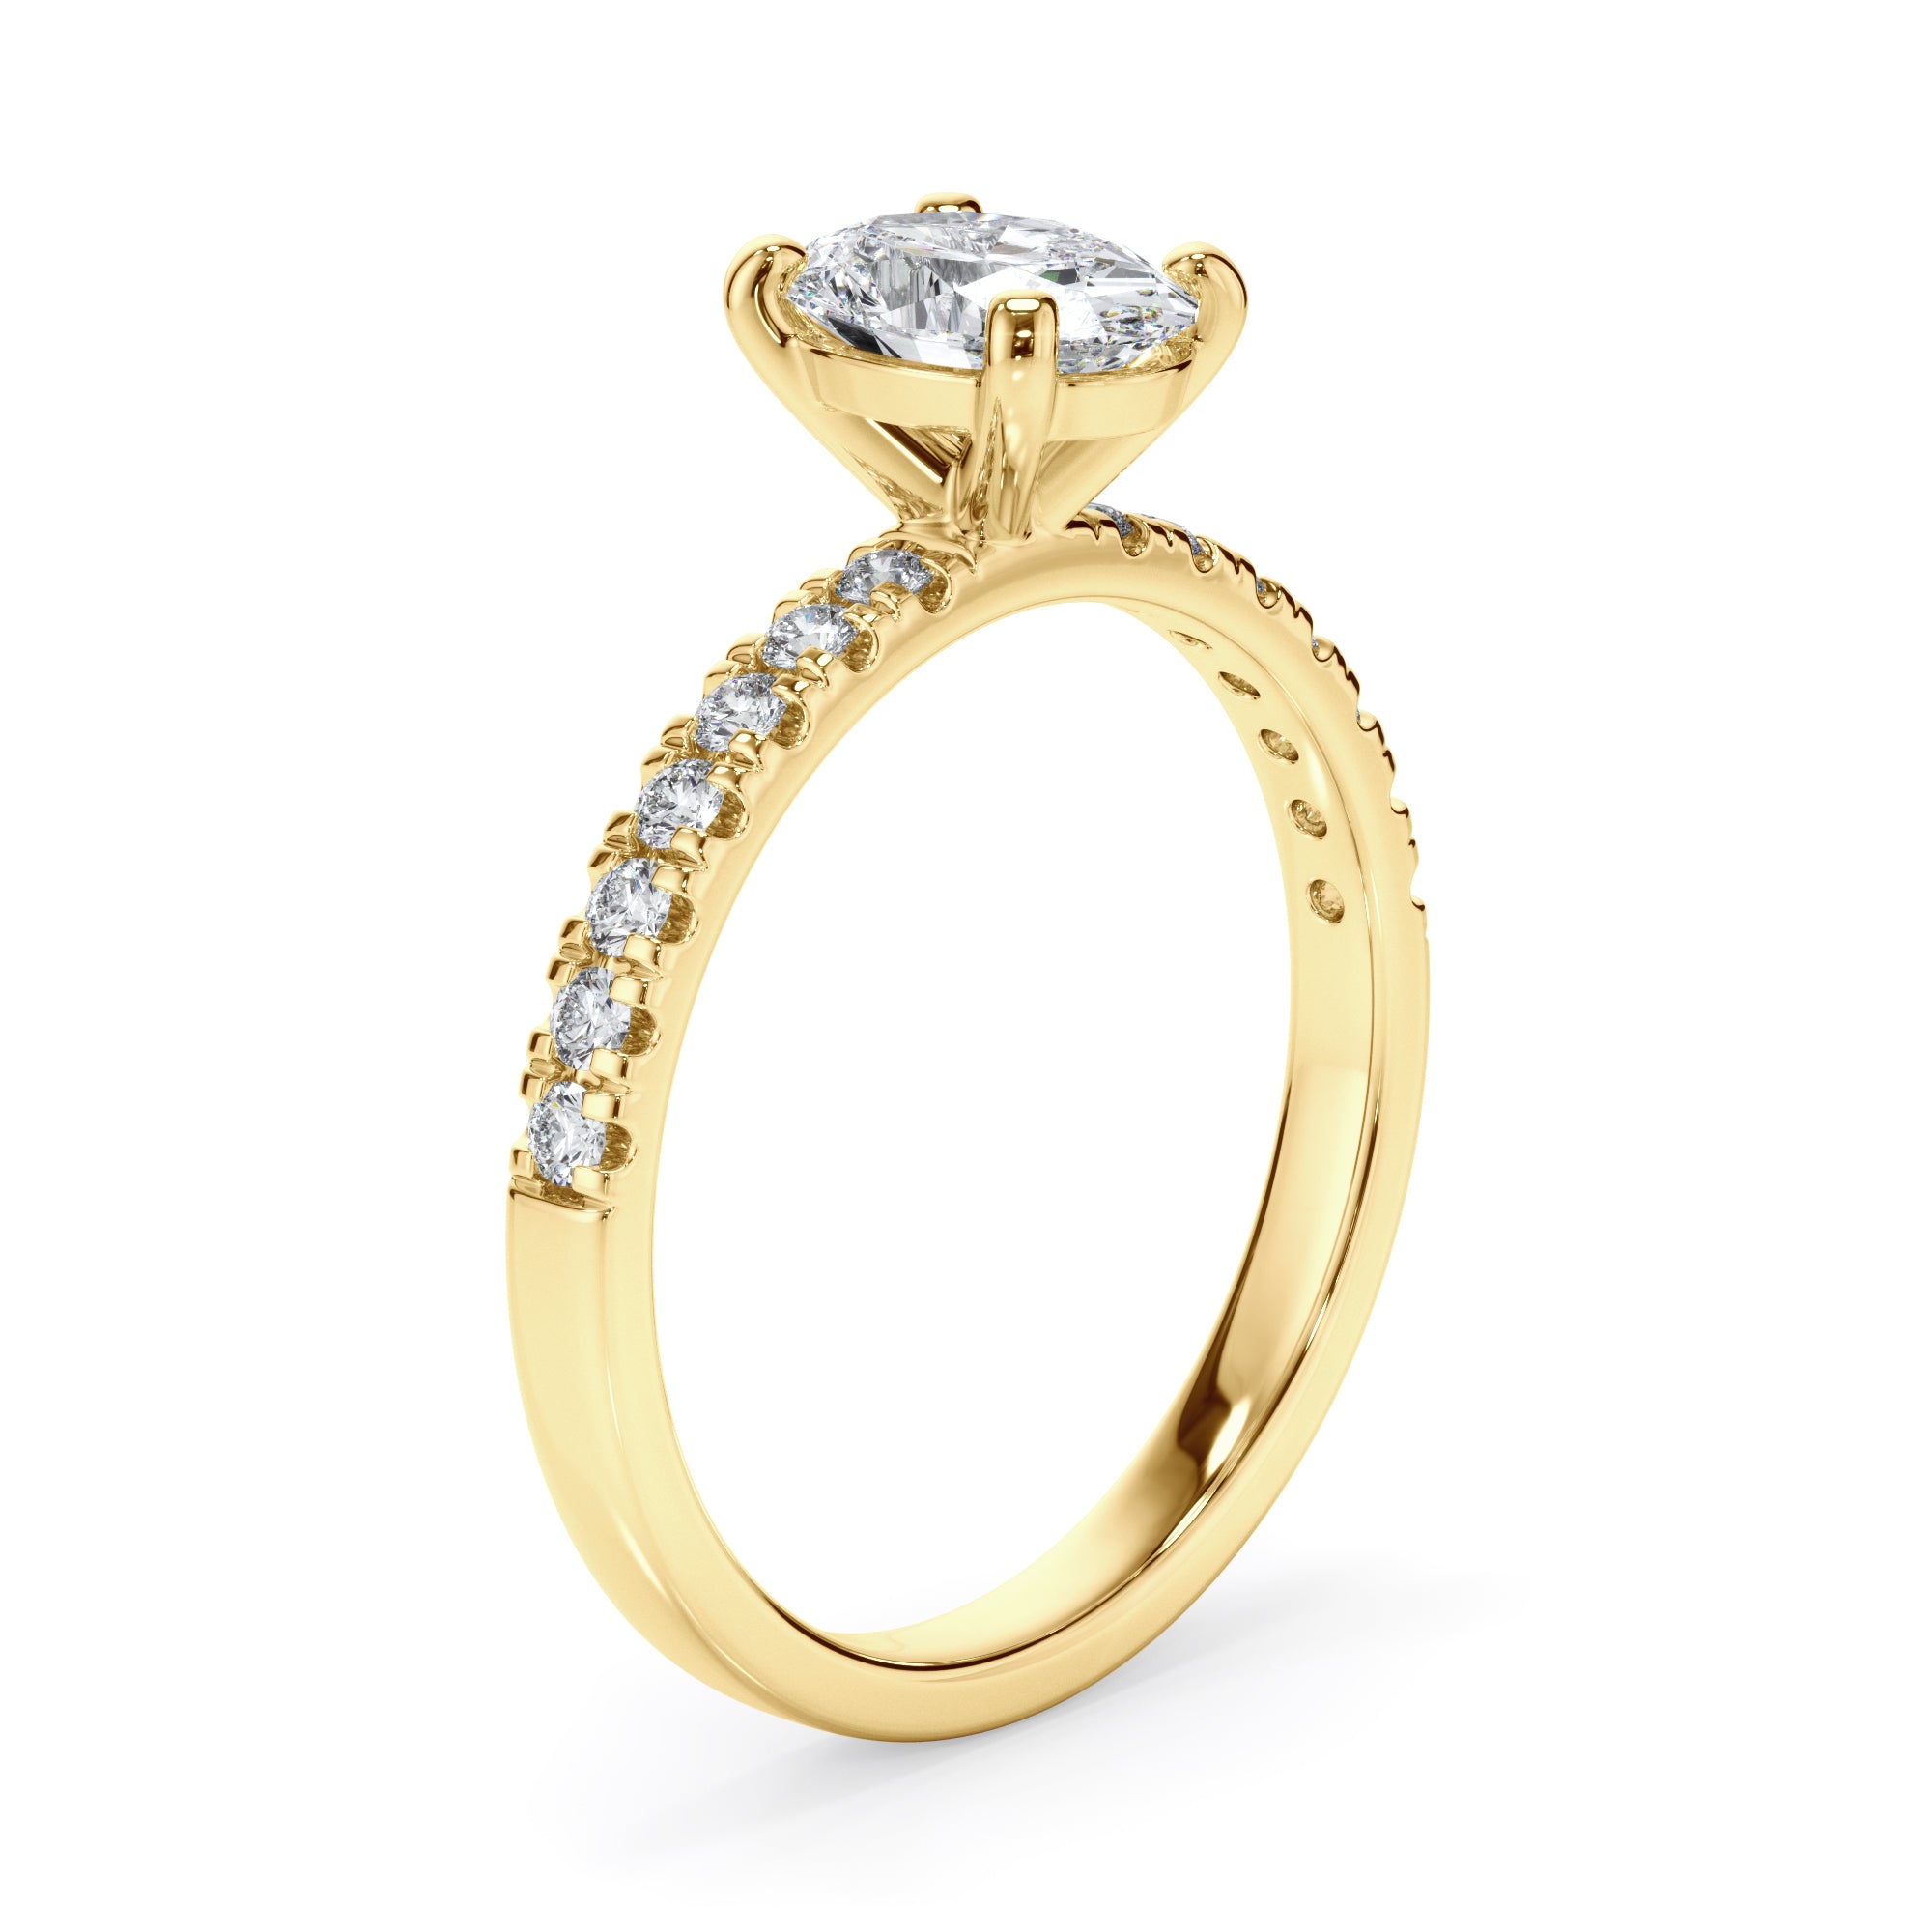 18ct Yellow Gold Oval Cut Diamond Engagement Ring with Shoulder Stone